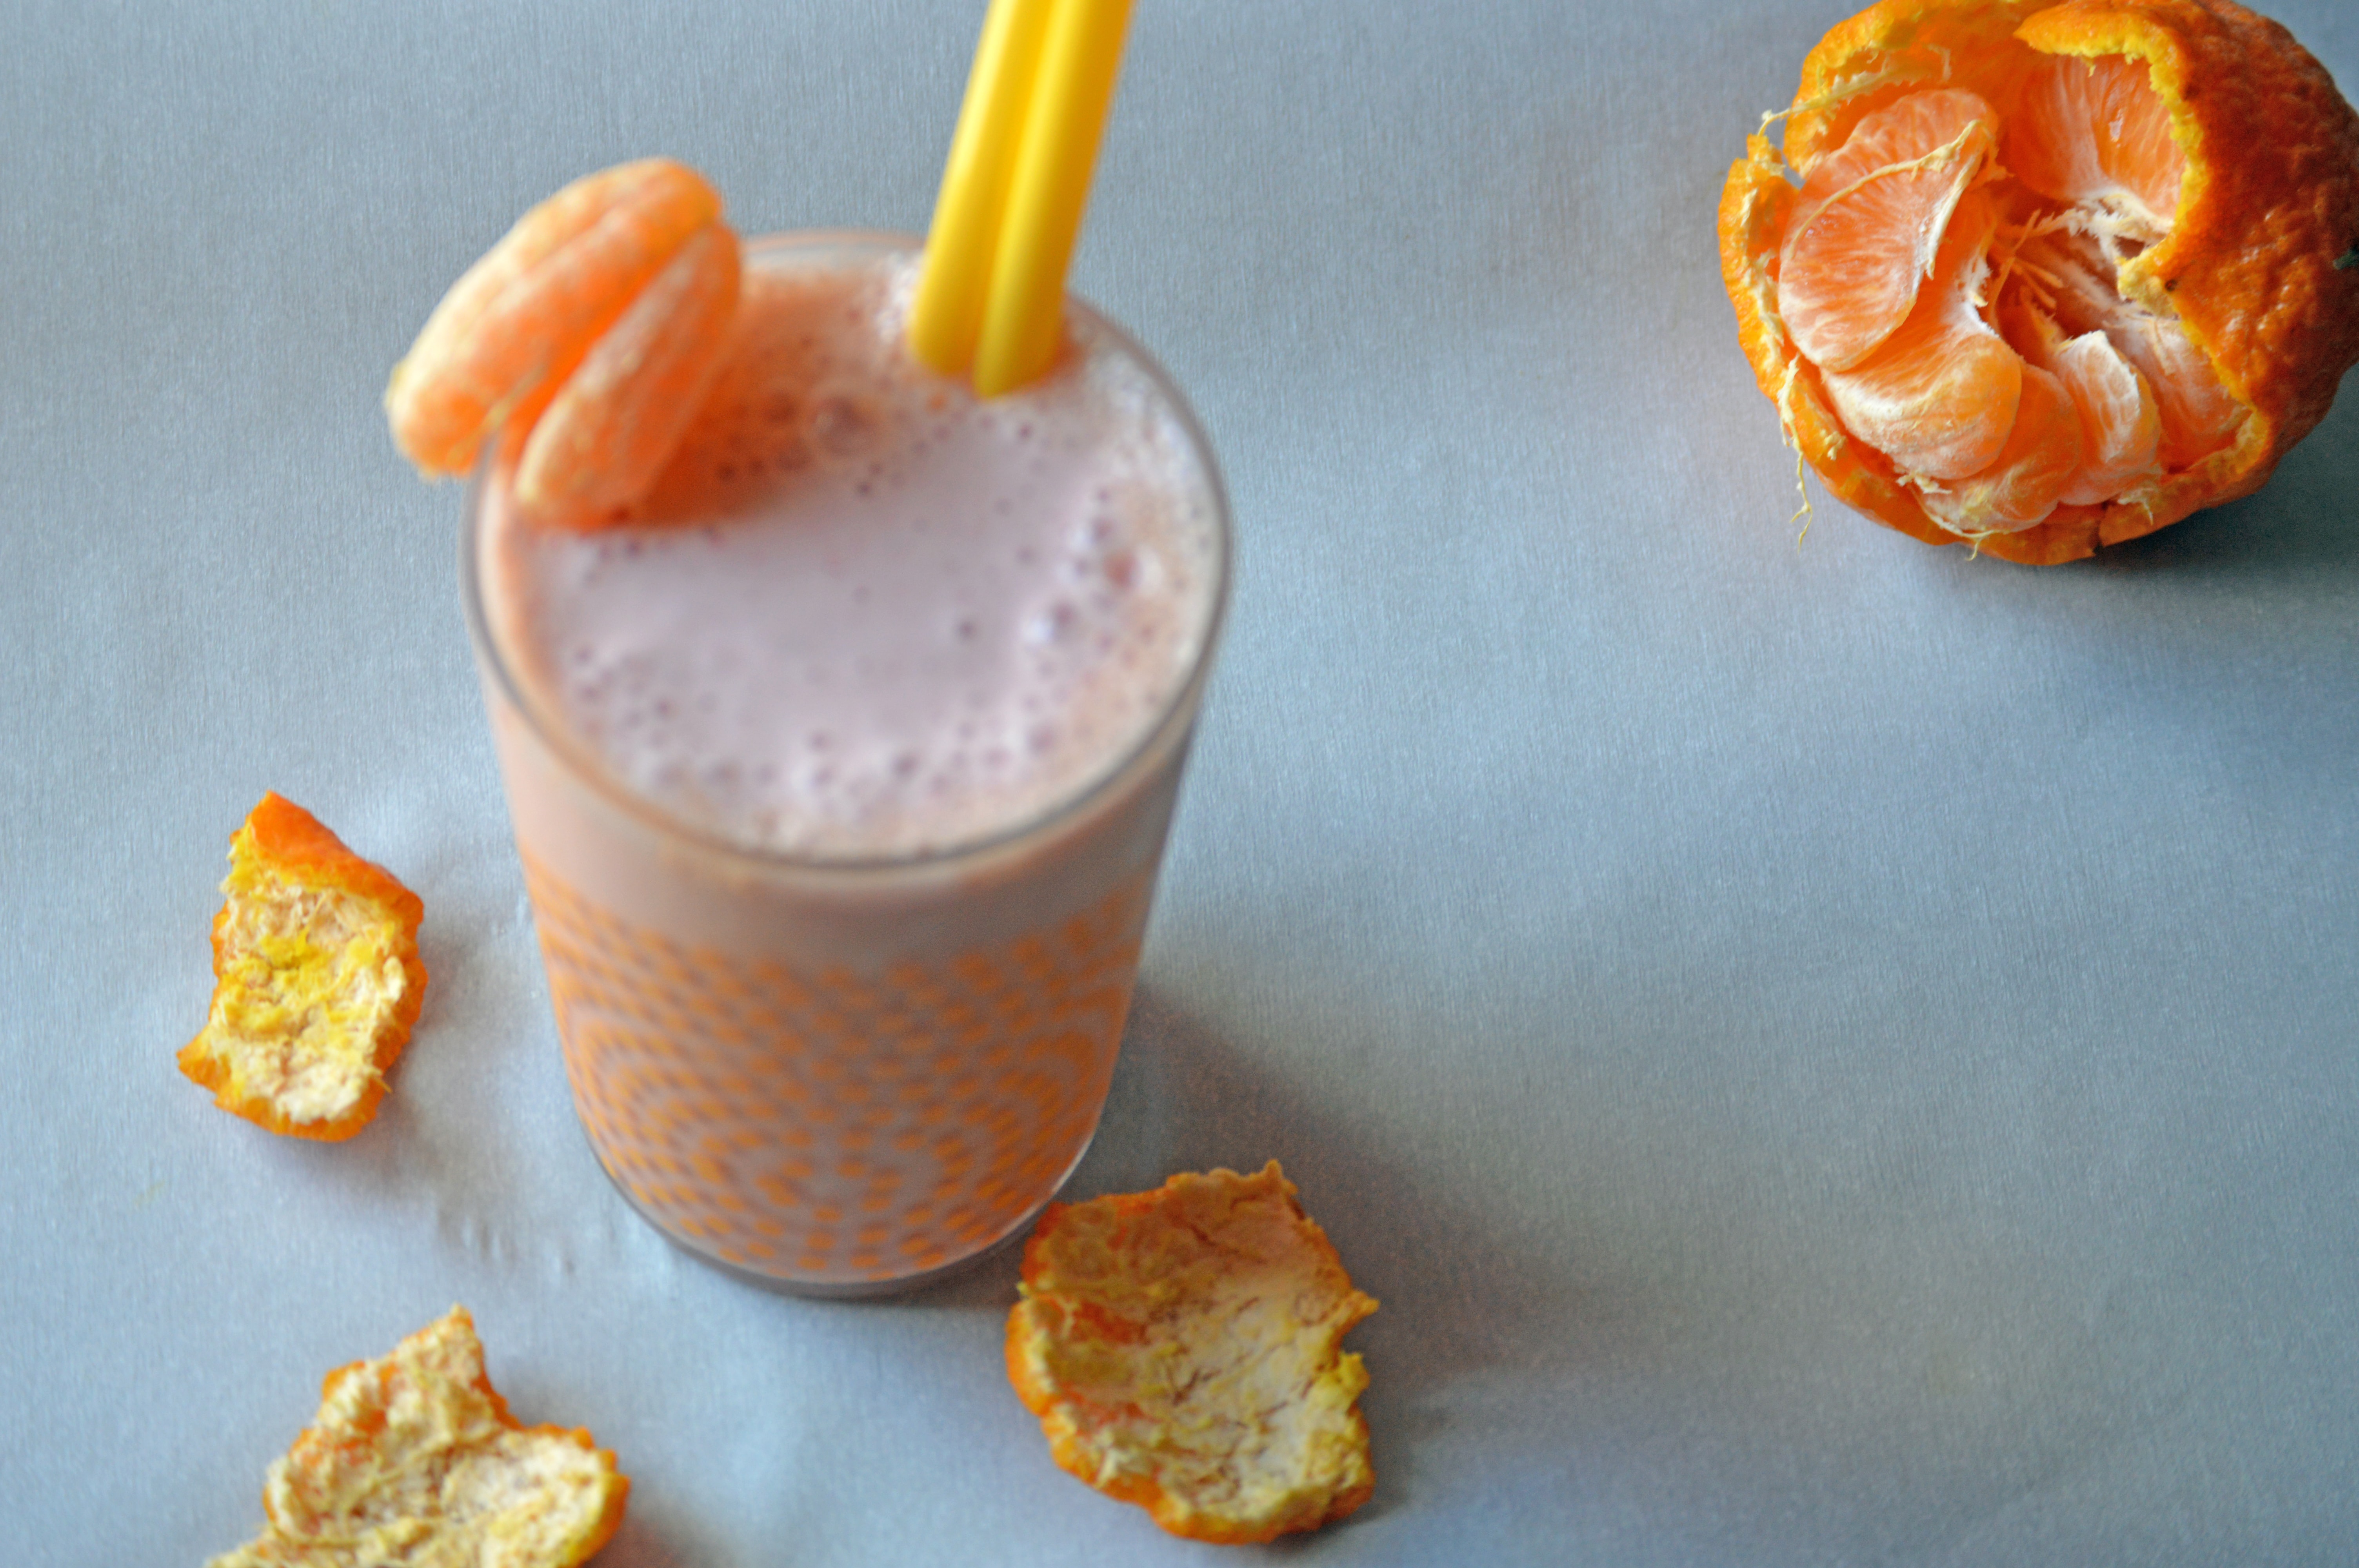 Tangerine Strawberry Creamiscle Smoothie 1